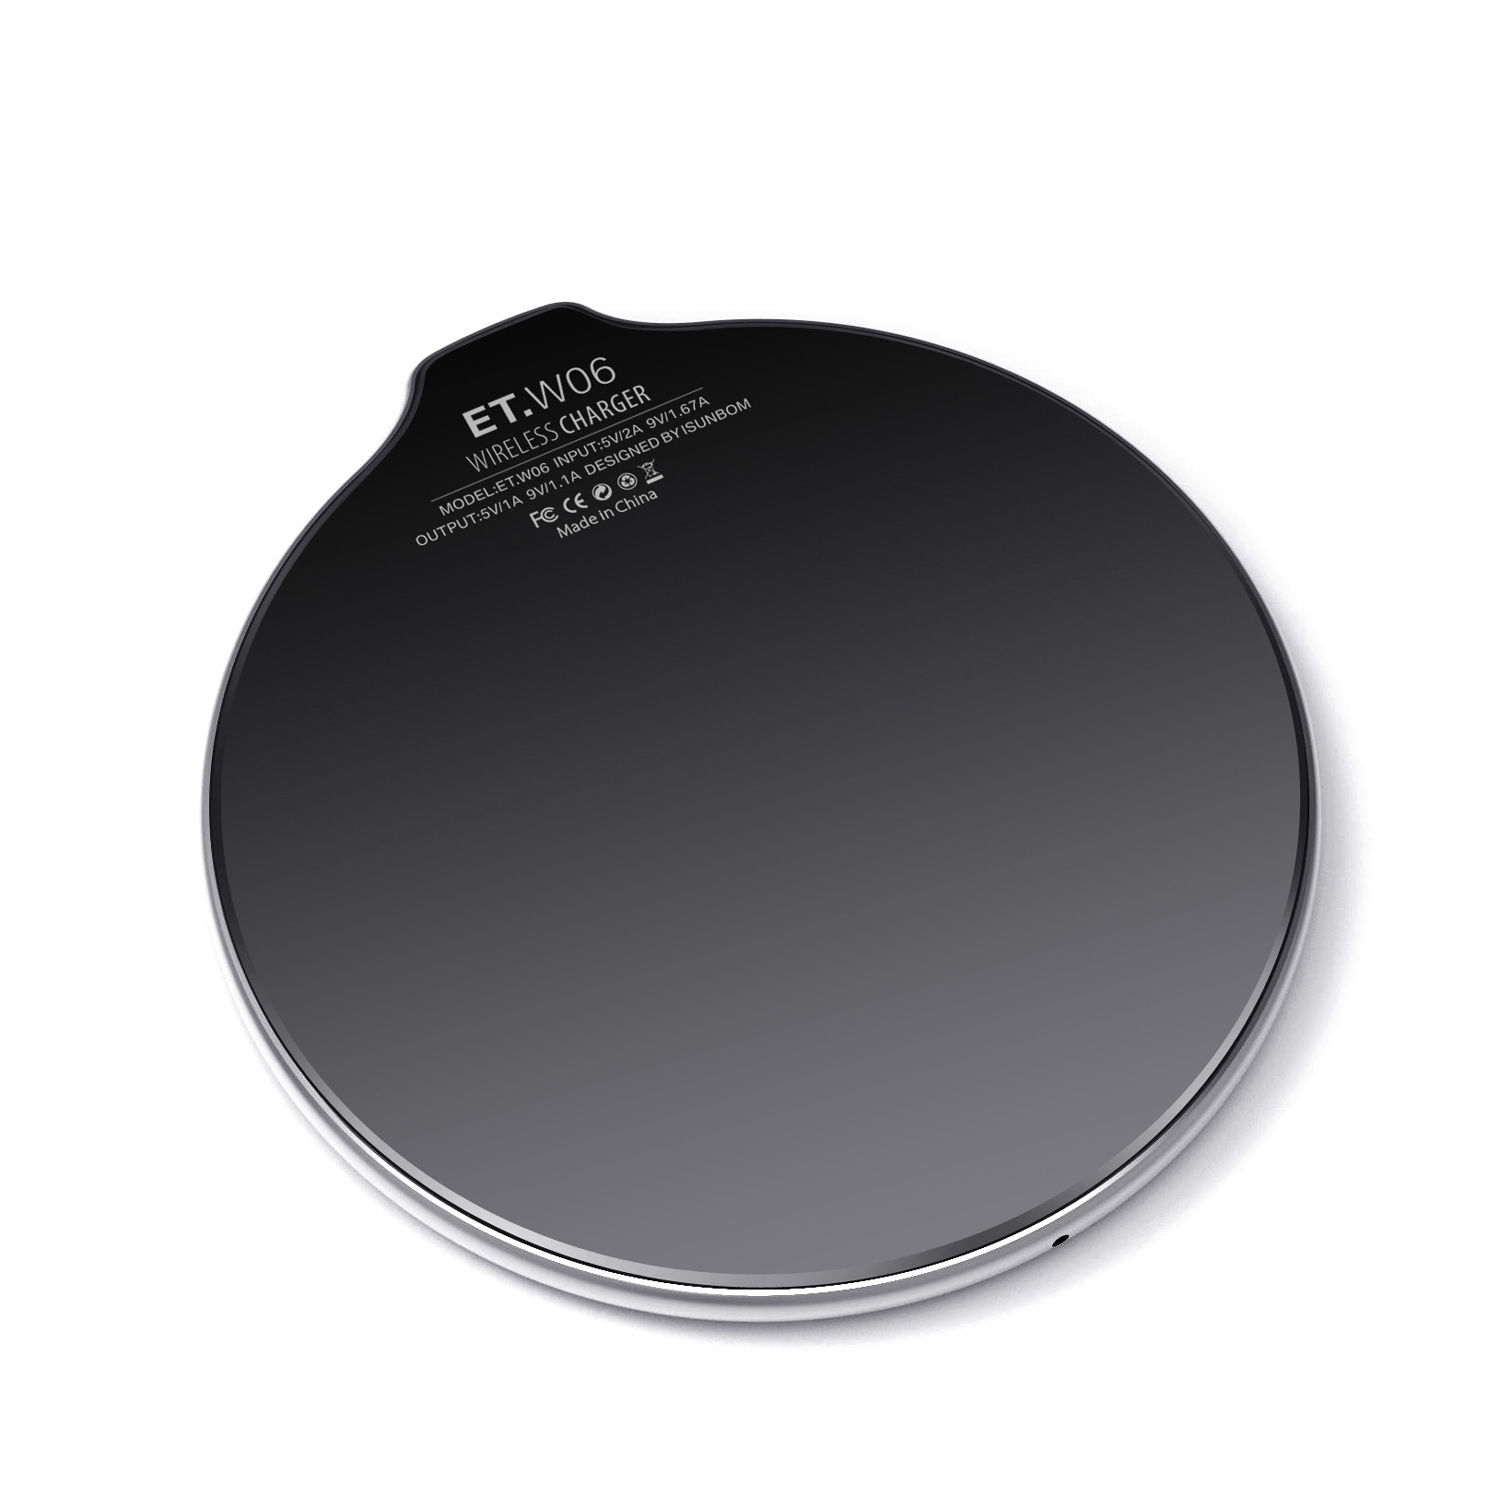 New design Fast Wireless Charge Ultra-thin Design aluminium alloy mobile phone qi wireless charger for xiaomi mi5